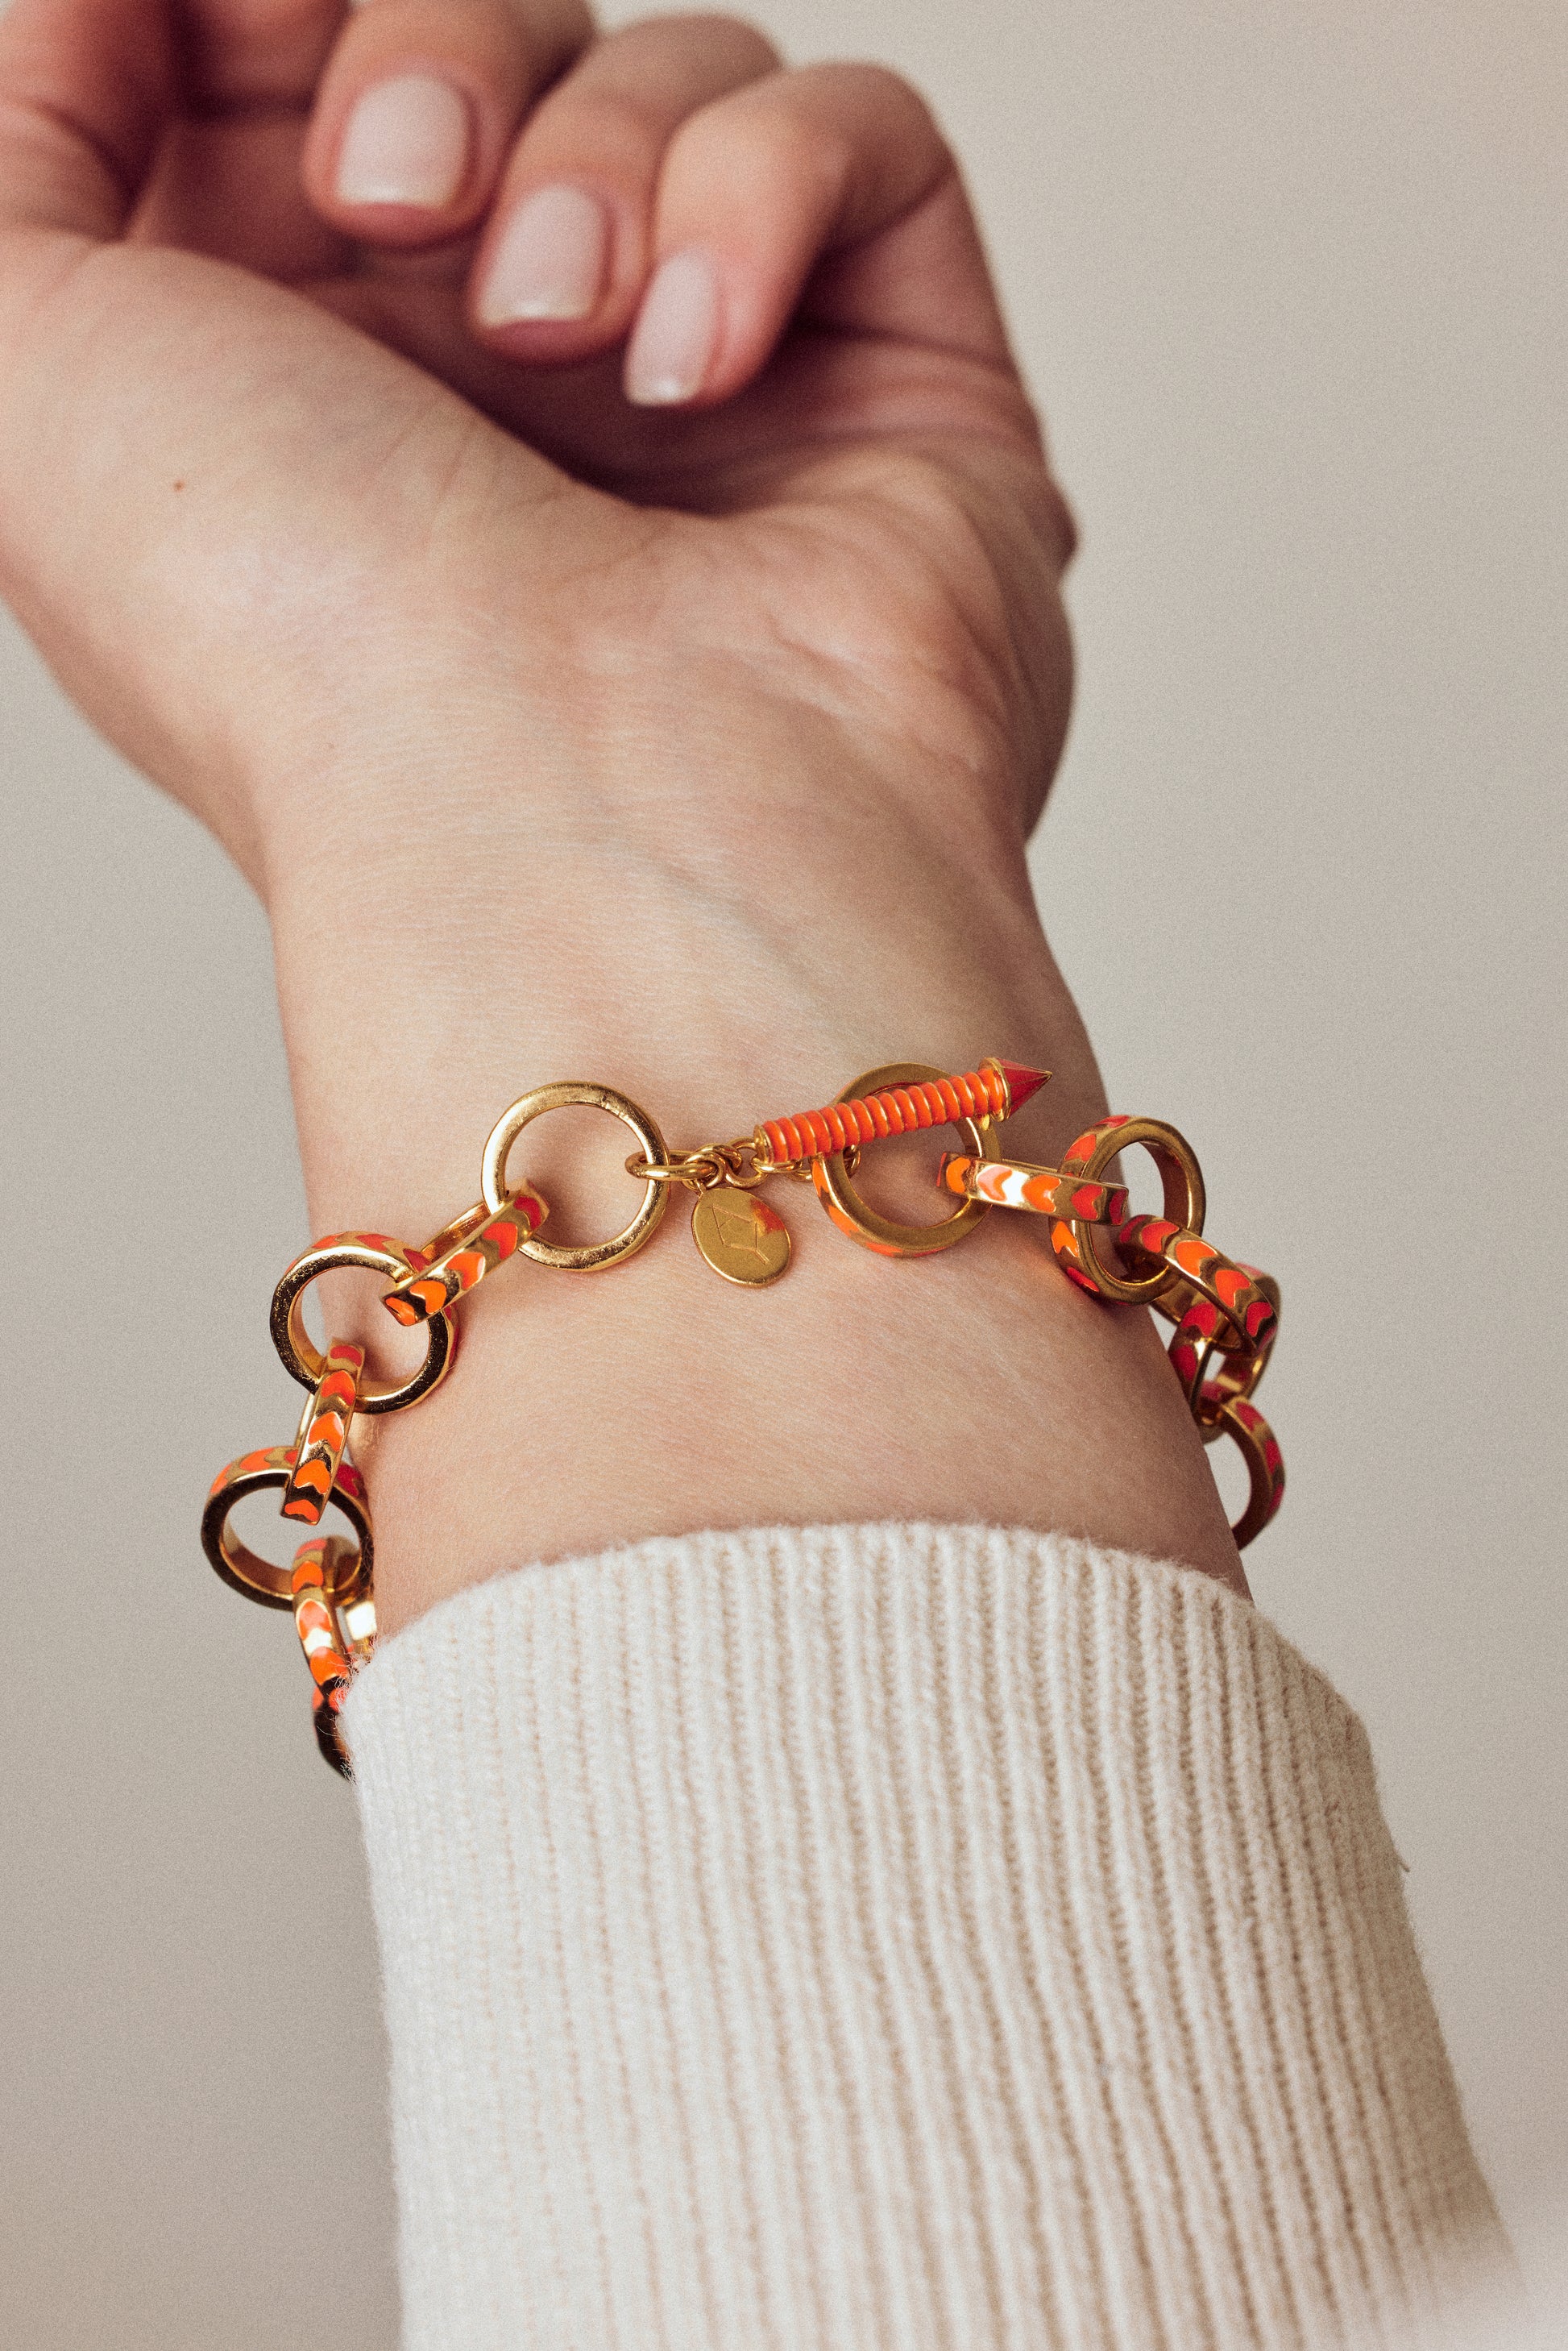 image of gold chain bracelet in orange of gold on wrist with arm outstretched in cream ribbed top